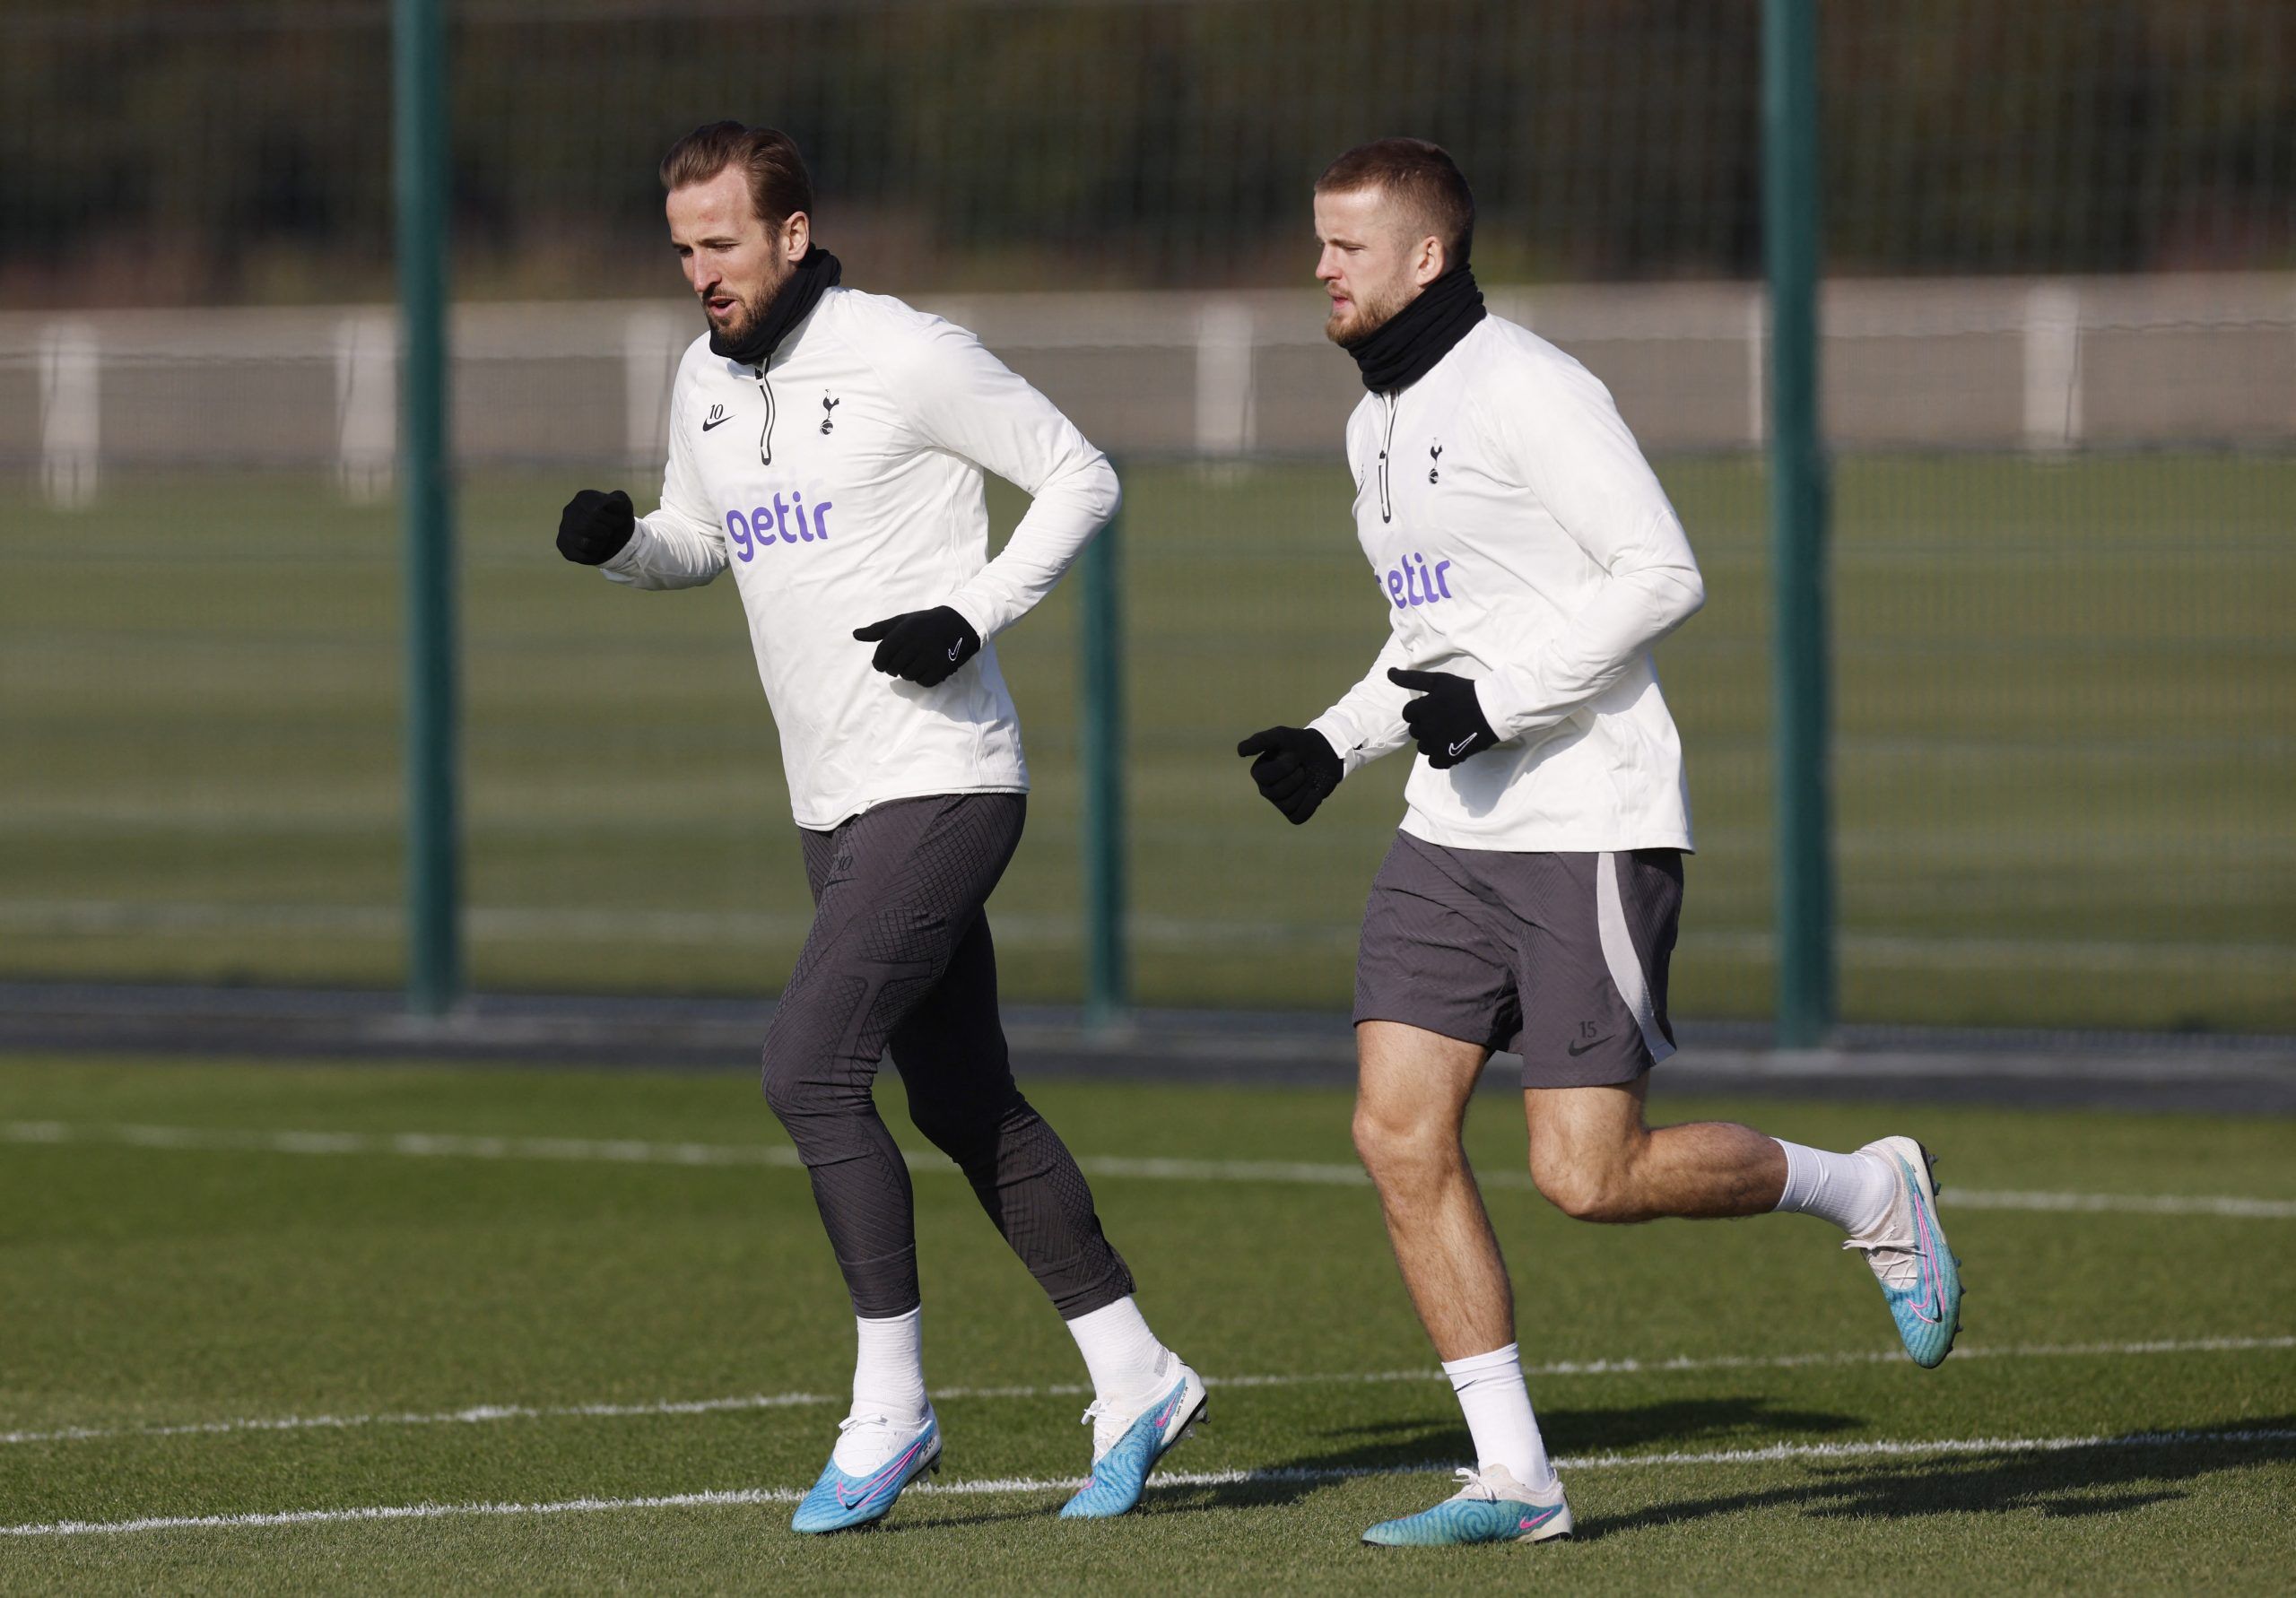 Soccer Football - Champions League - Tottenham Hotspur Training - Tottenham Hotspur Training Centre, London, Britain - February 13, 2023 Tottenham Hotspur's Harry Kane and Eric Dier during training Action Images via Reuters/Andrew Couldridge